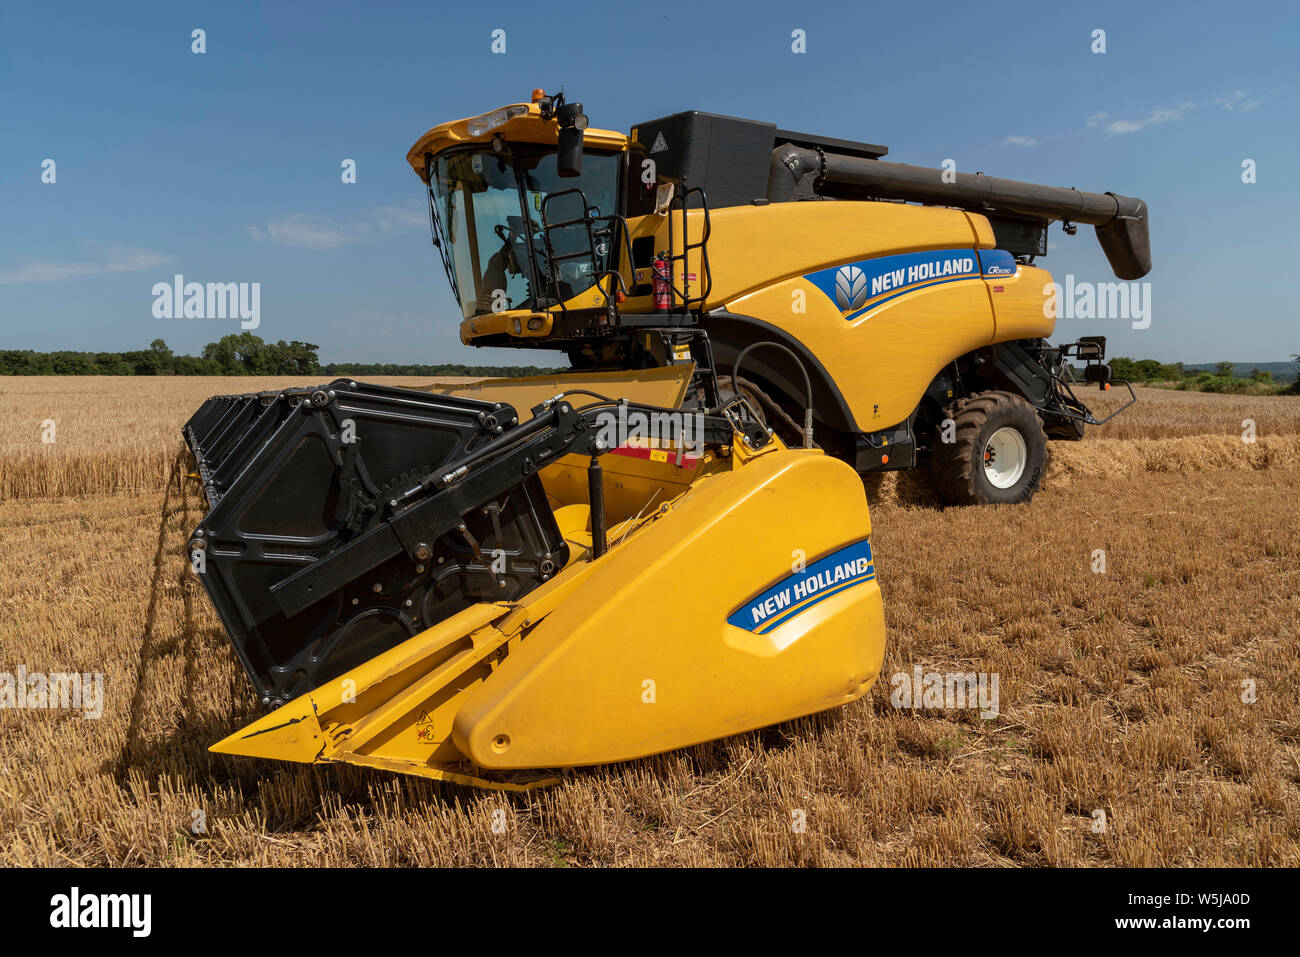 Cheltenham, Gloucestershire, England, UK, July 2019.  Combine harvester harvesting winter barley which after drying will go to brew beer. Stock Photo